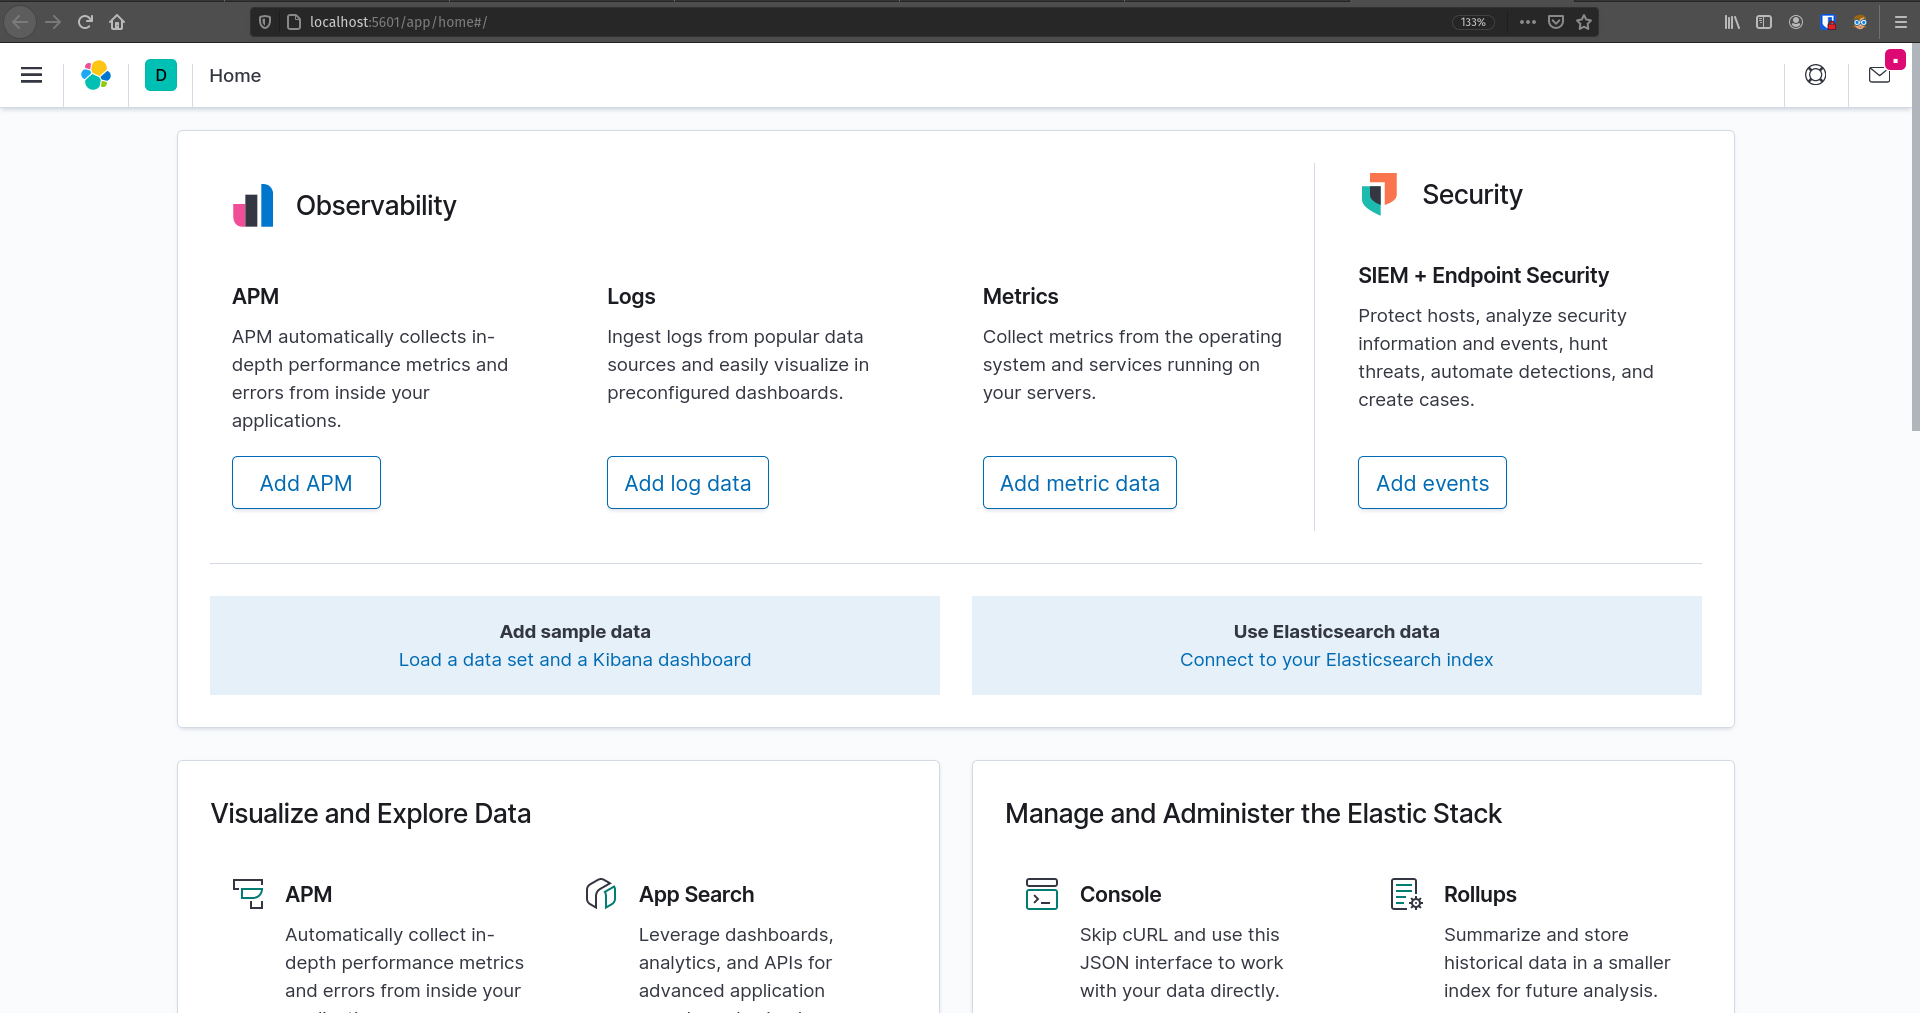 ../../_images/kibana-home-page.png